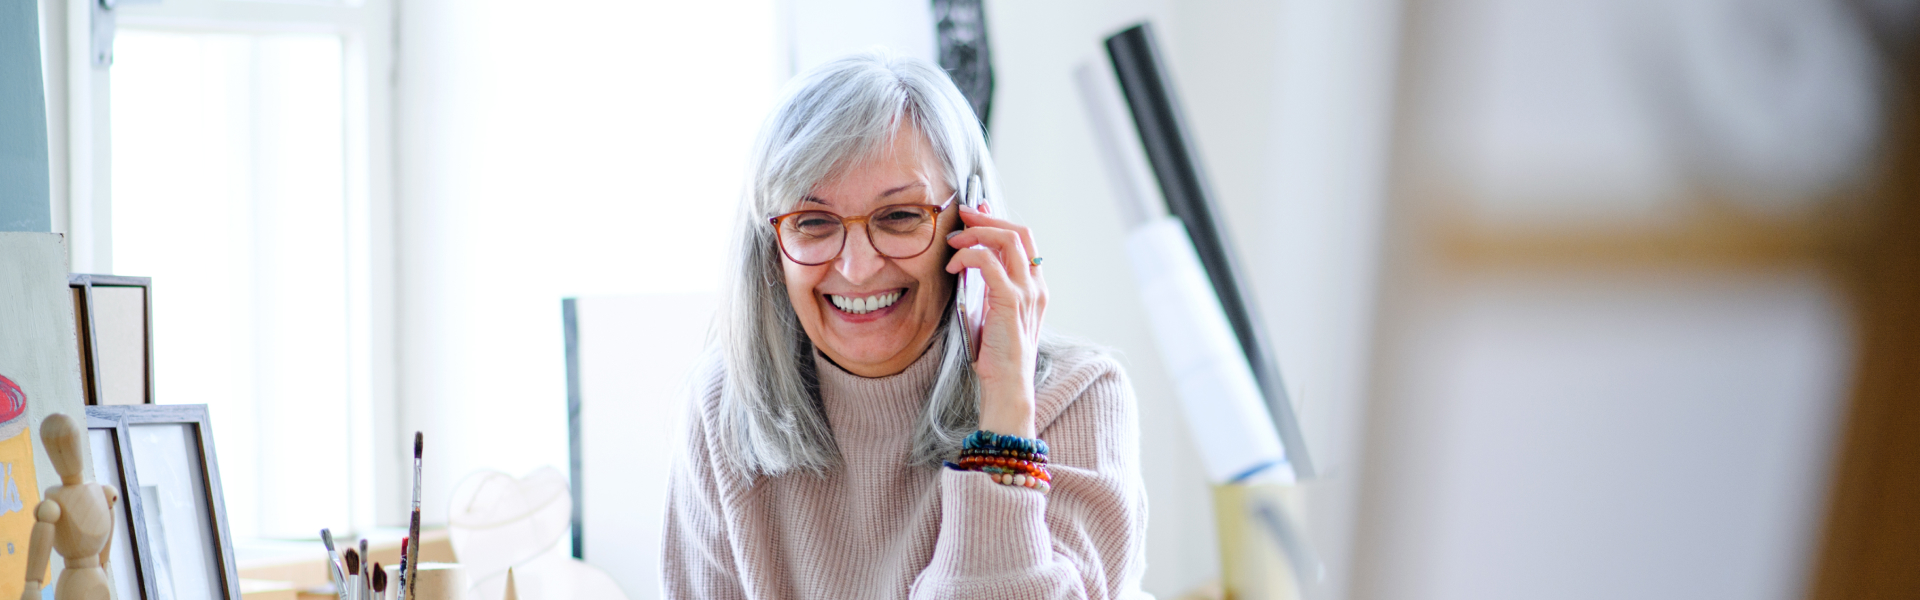 An older woman is smiling while holding a phone to her ear.